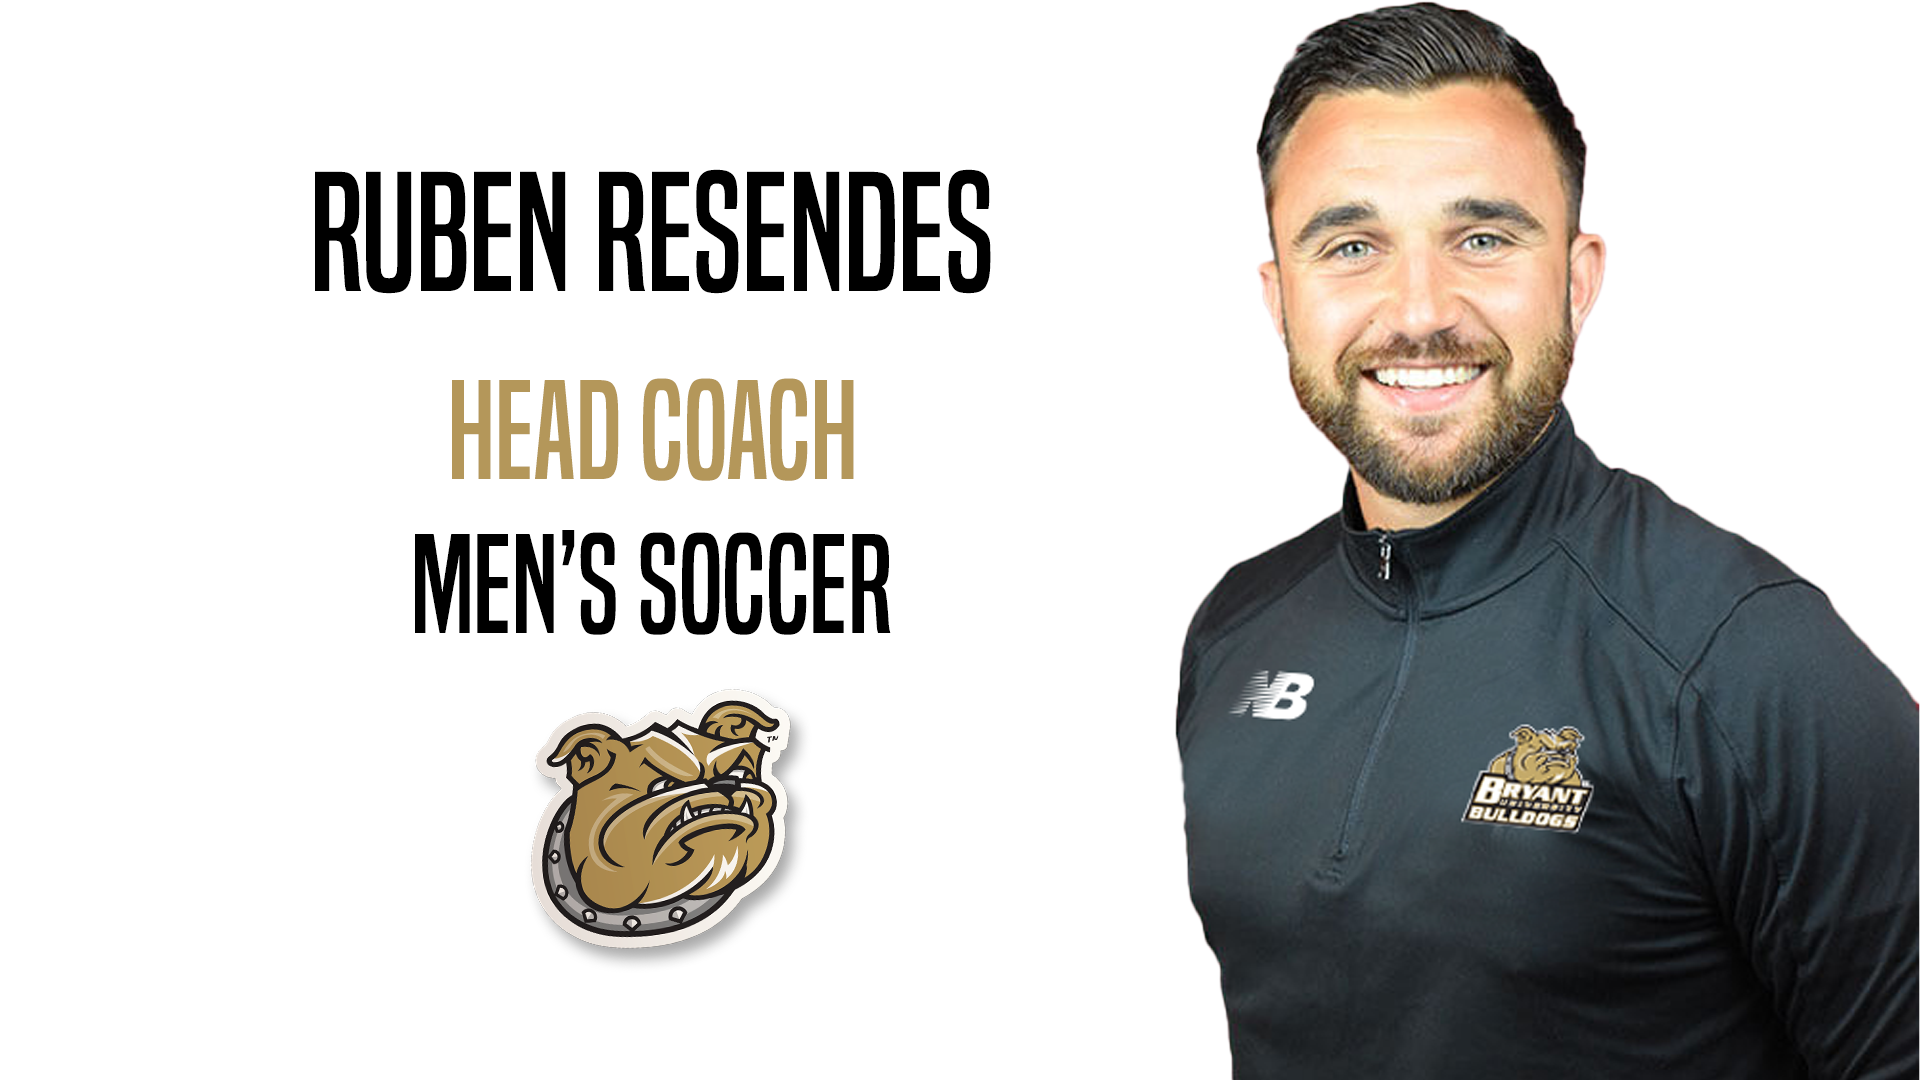 NCAA National Champion coach Ruben Resendes Named Men's Soccer Head Coach at Bryant University